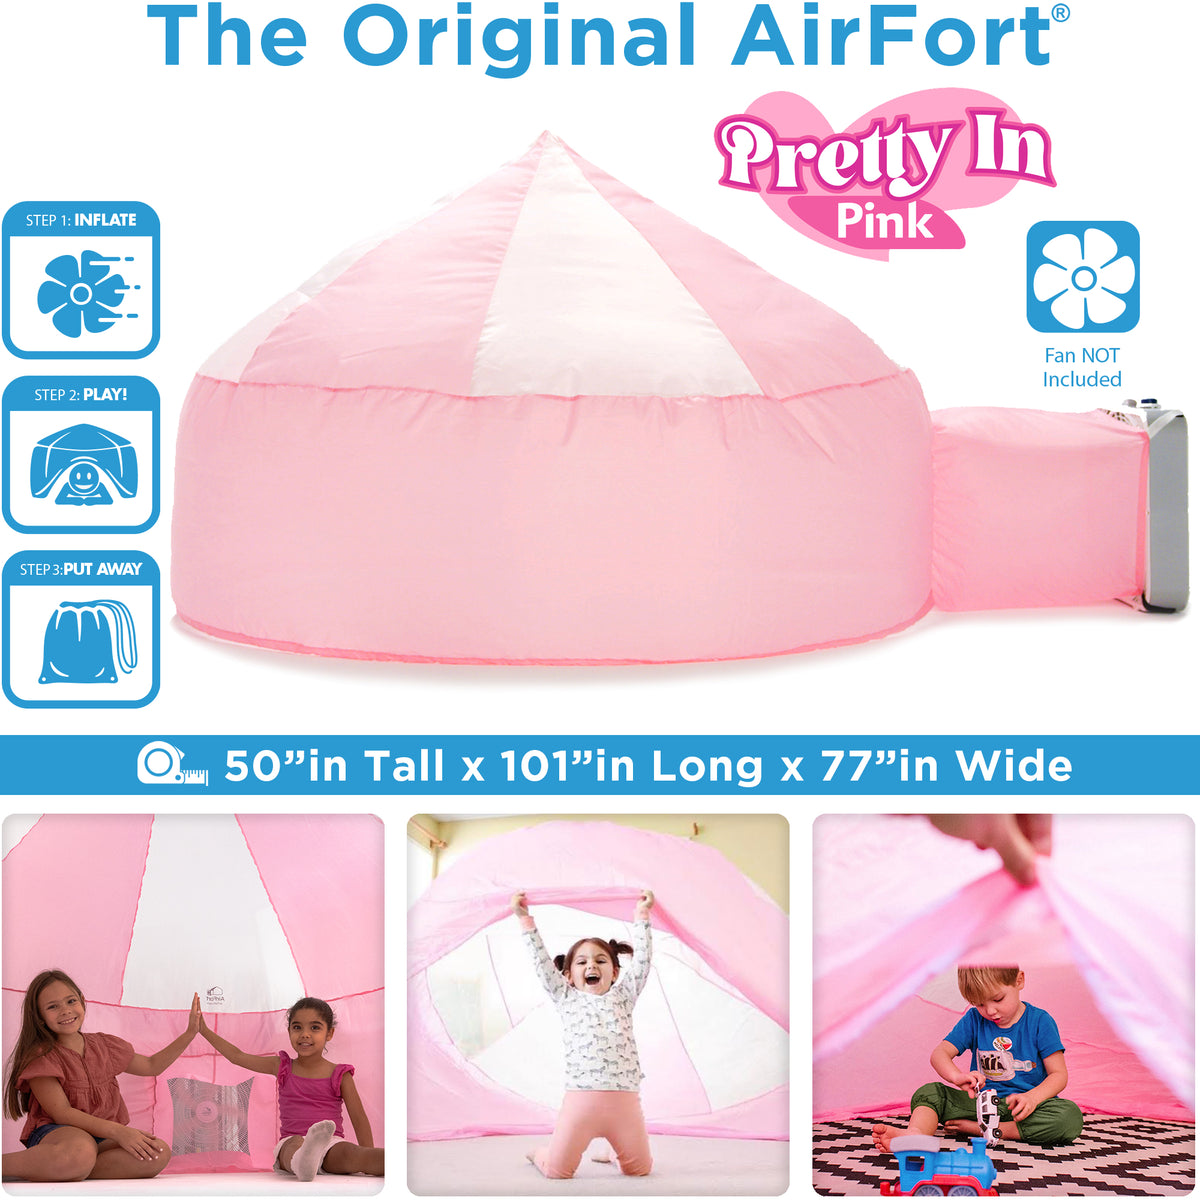 The Original AirFort - Pretty In Pink